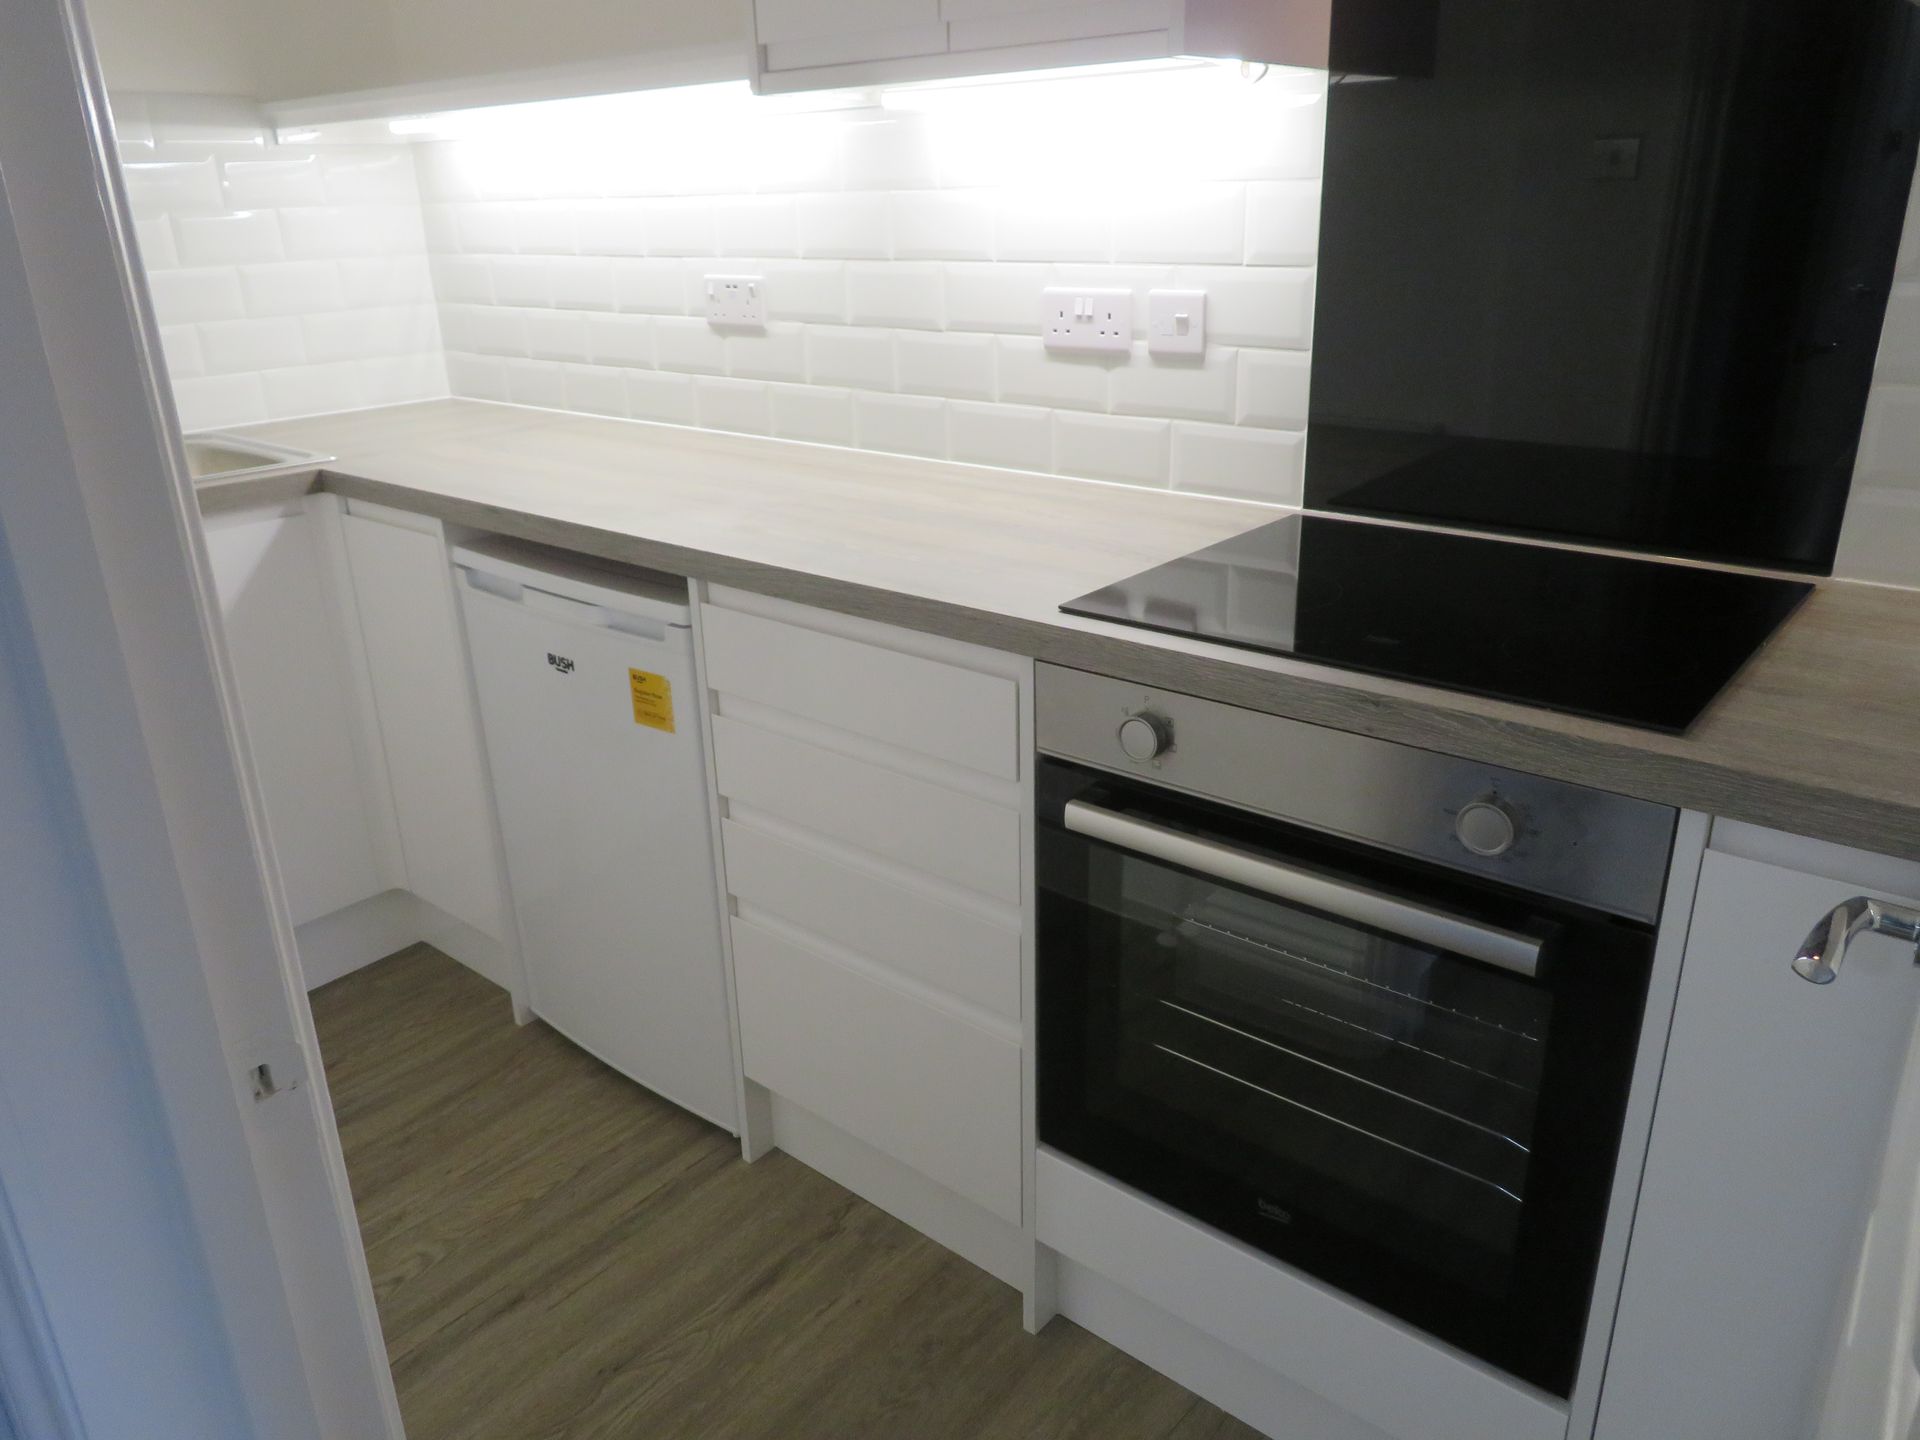 1 bed flat to rent reading kitchen